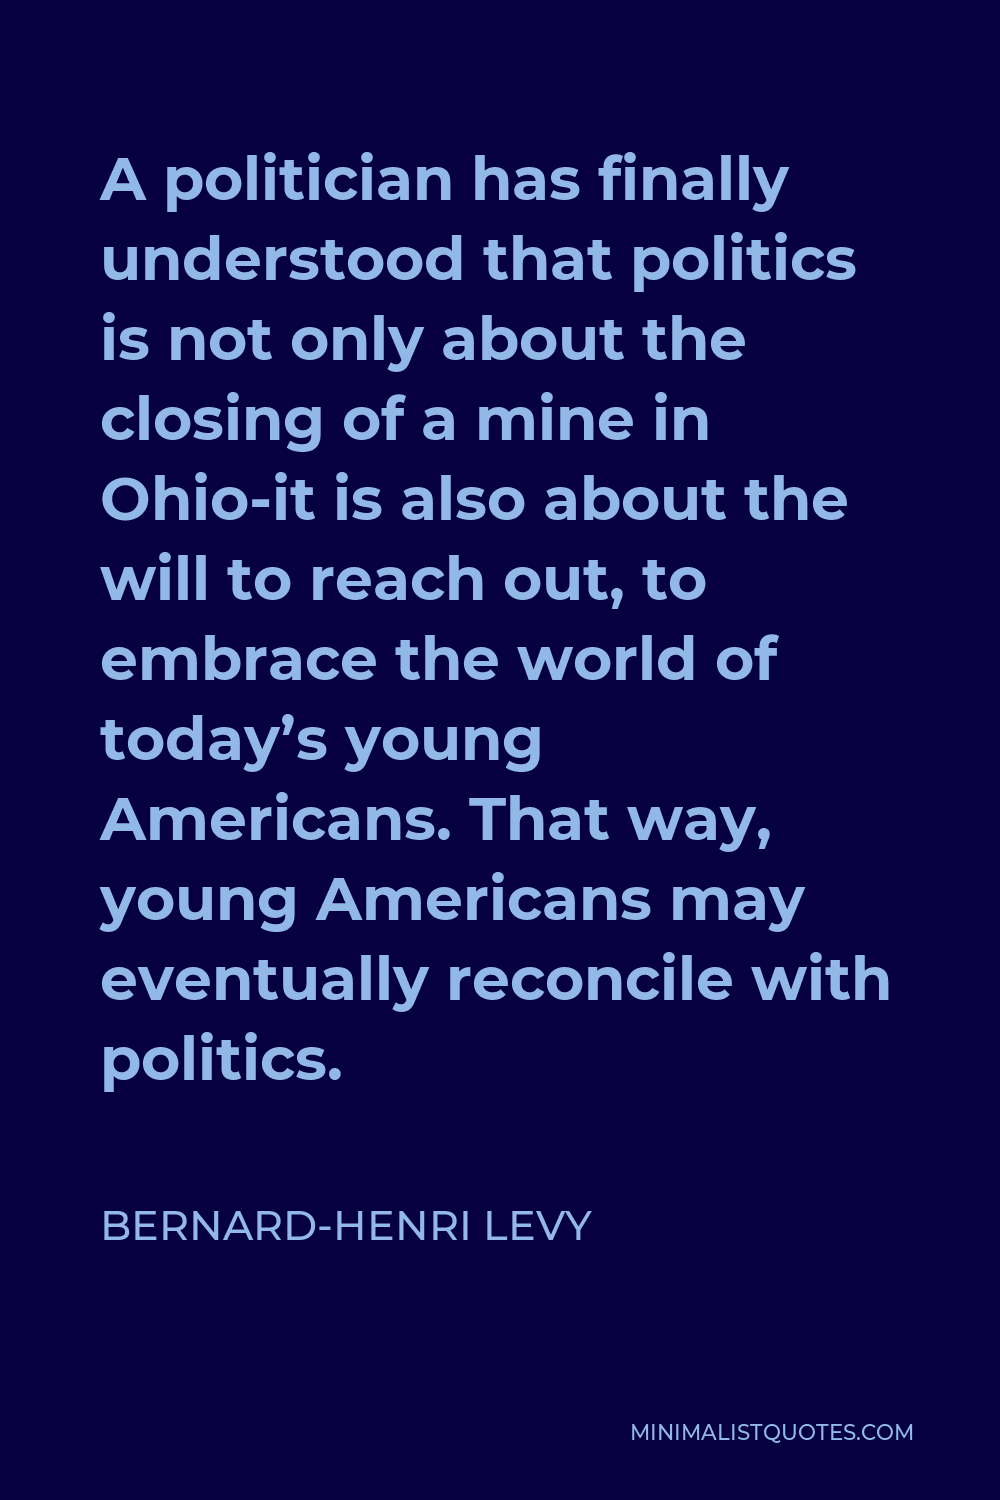 Bernard-Henri Levy Quote - A politician has finally understood that politics is not only about the closing of a mine in Ohio-it is also about the will to reach out, to embrace the world of today’s young Americans. That way, young Americans may eventually reconcile with politics.